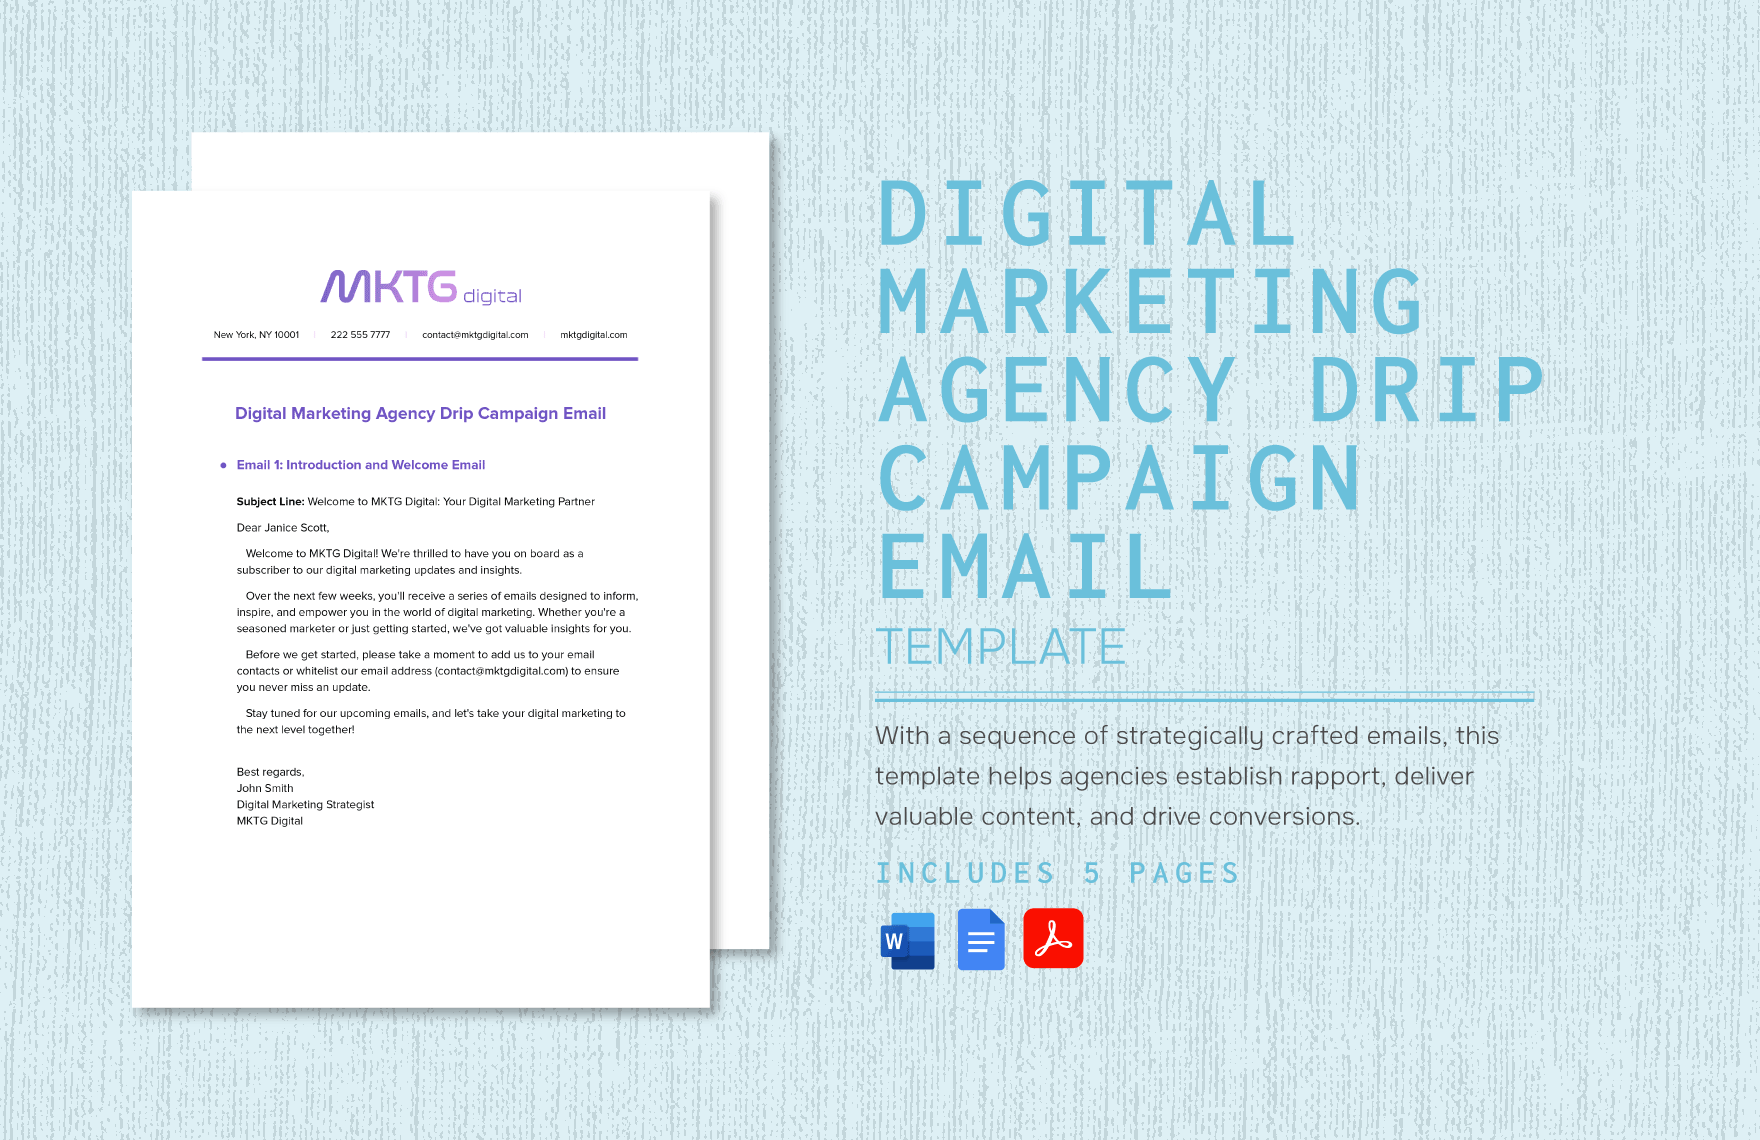 Digital Marketing Agency Drip Campaign Email Template